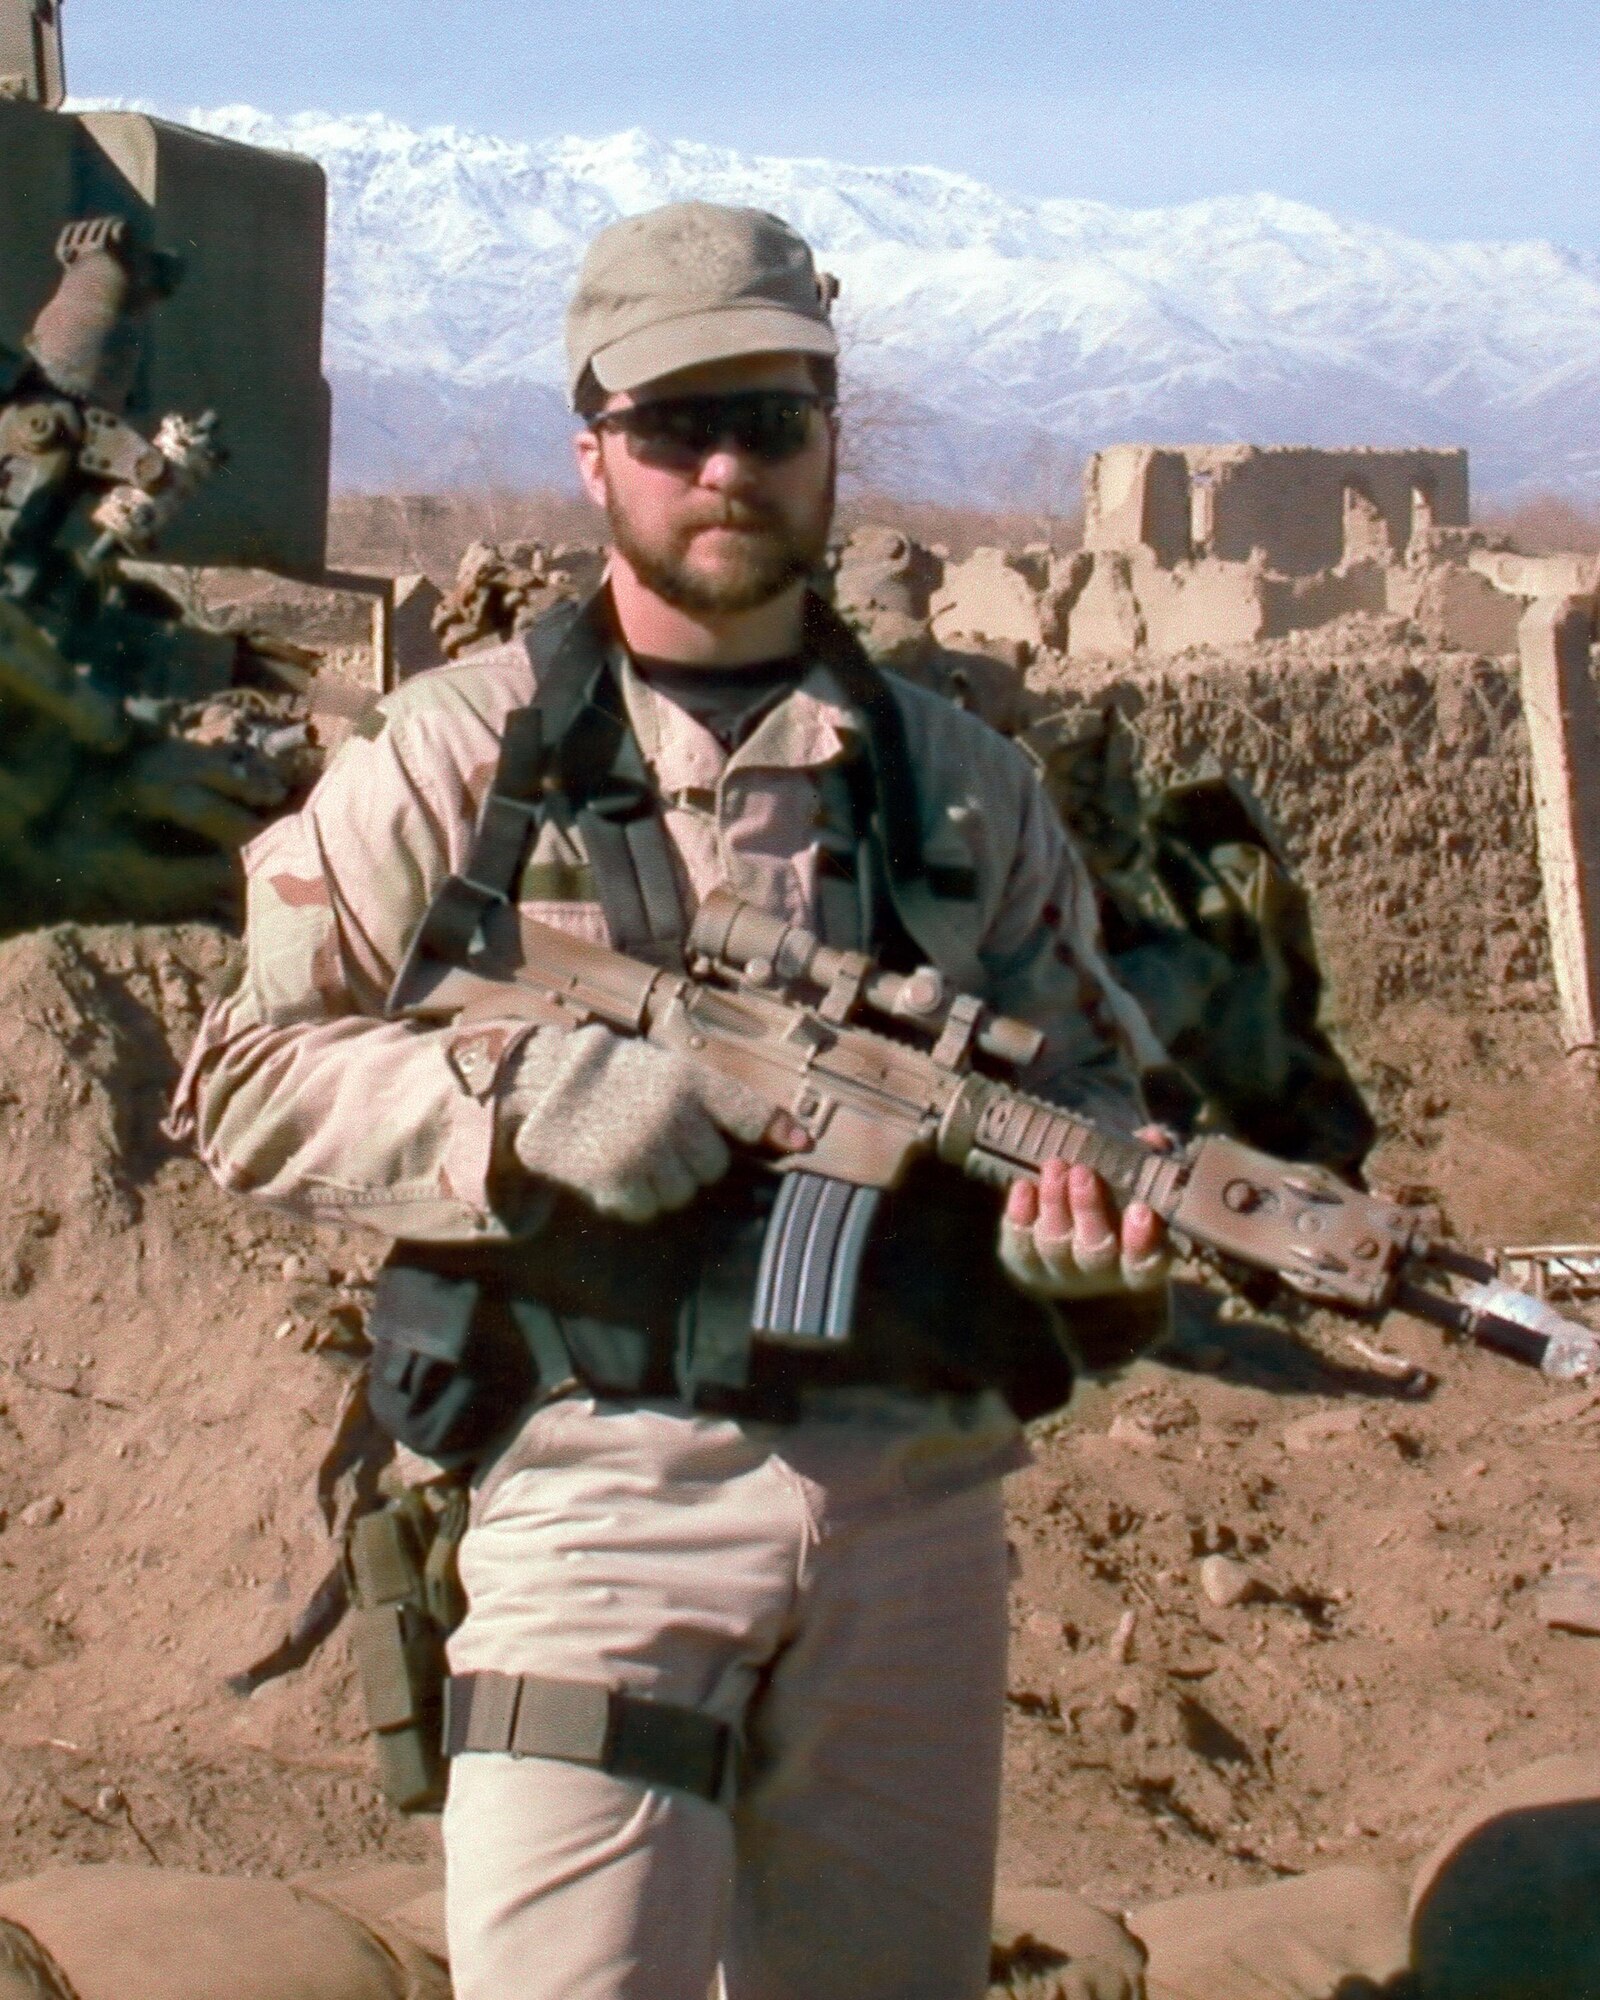 President Donald Trump will posthumously award the Medal of Honor to the family of fallen U.S. Air Force Tech. Sgt. John Chapman at a ceremony on August 22 for his extraordinary heroism in March 2002 while deployed to Afghanistan.